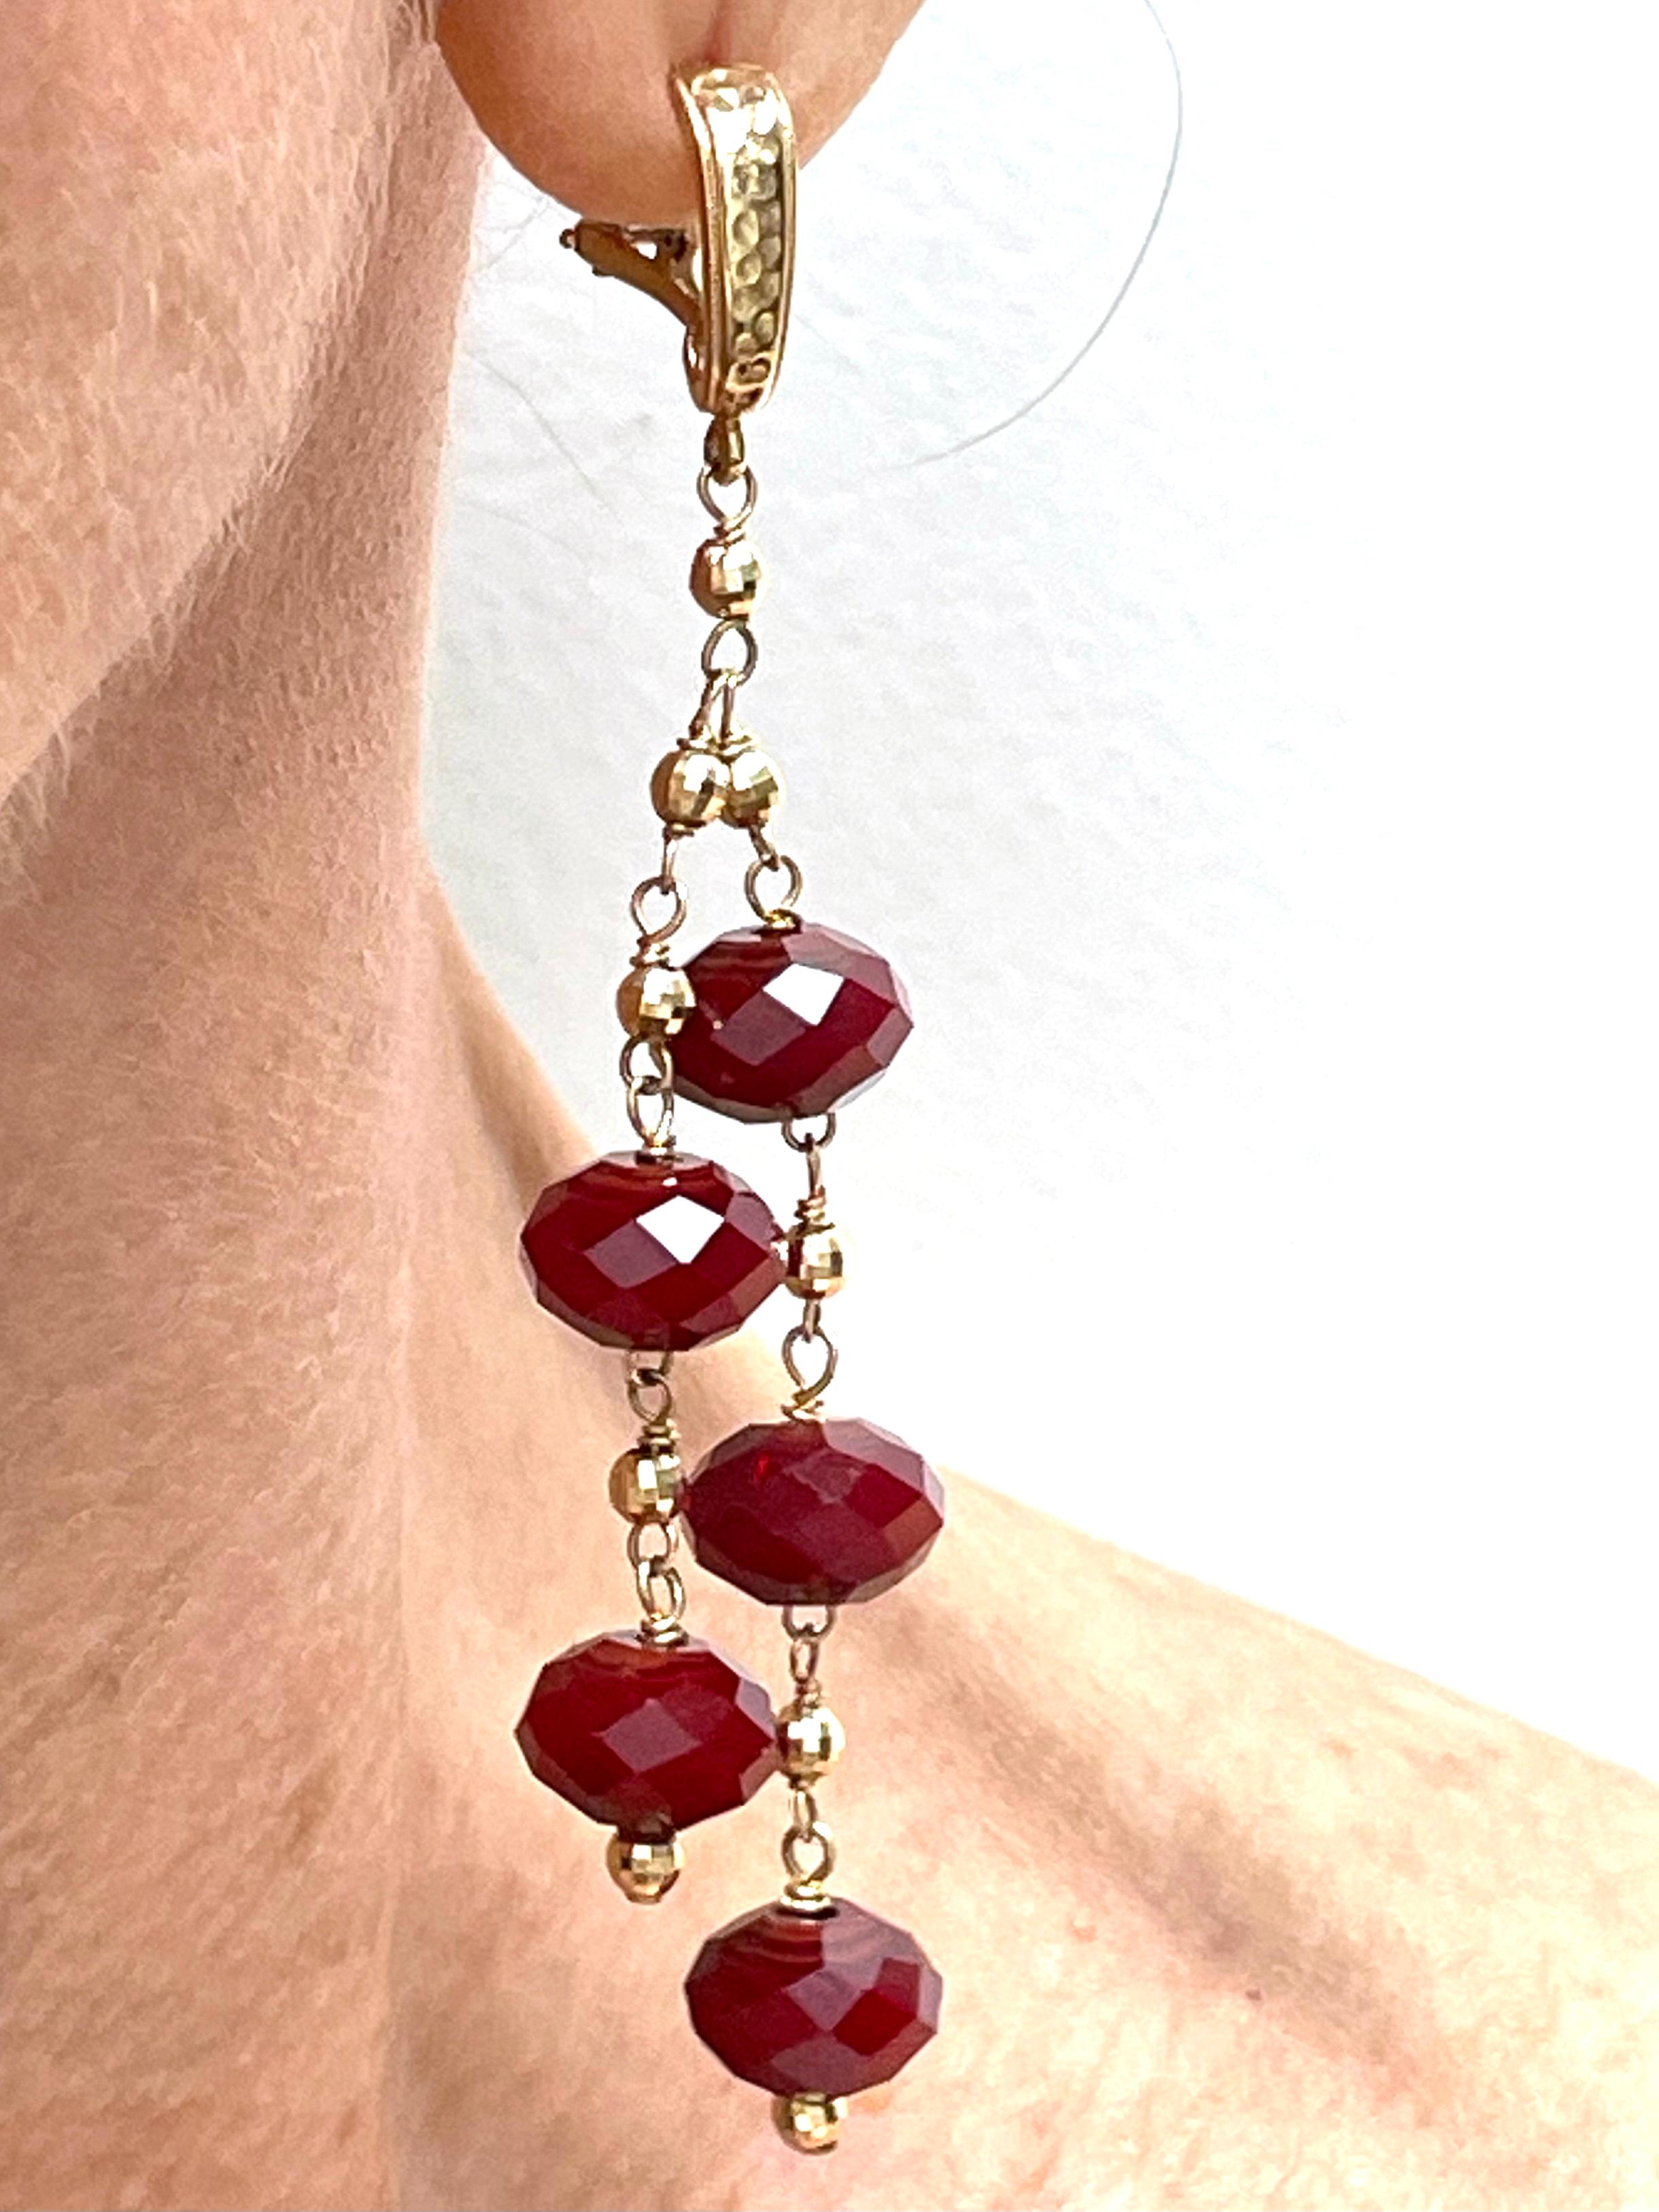 Description
Whimsical, festive, cheerful. Isn’t that what the season calls for? Prominent, lightweight, full of bold sparkling rich red Ruby Quartz mingling with tiny faceted yellow gold balls suspended from hand hammered posts with omega backs.